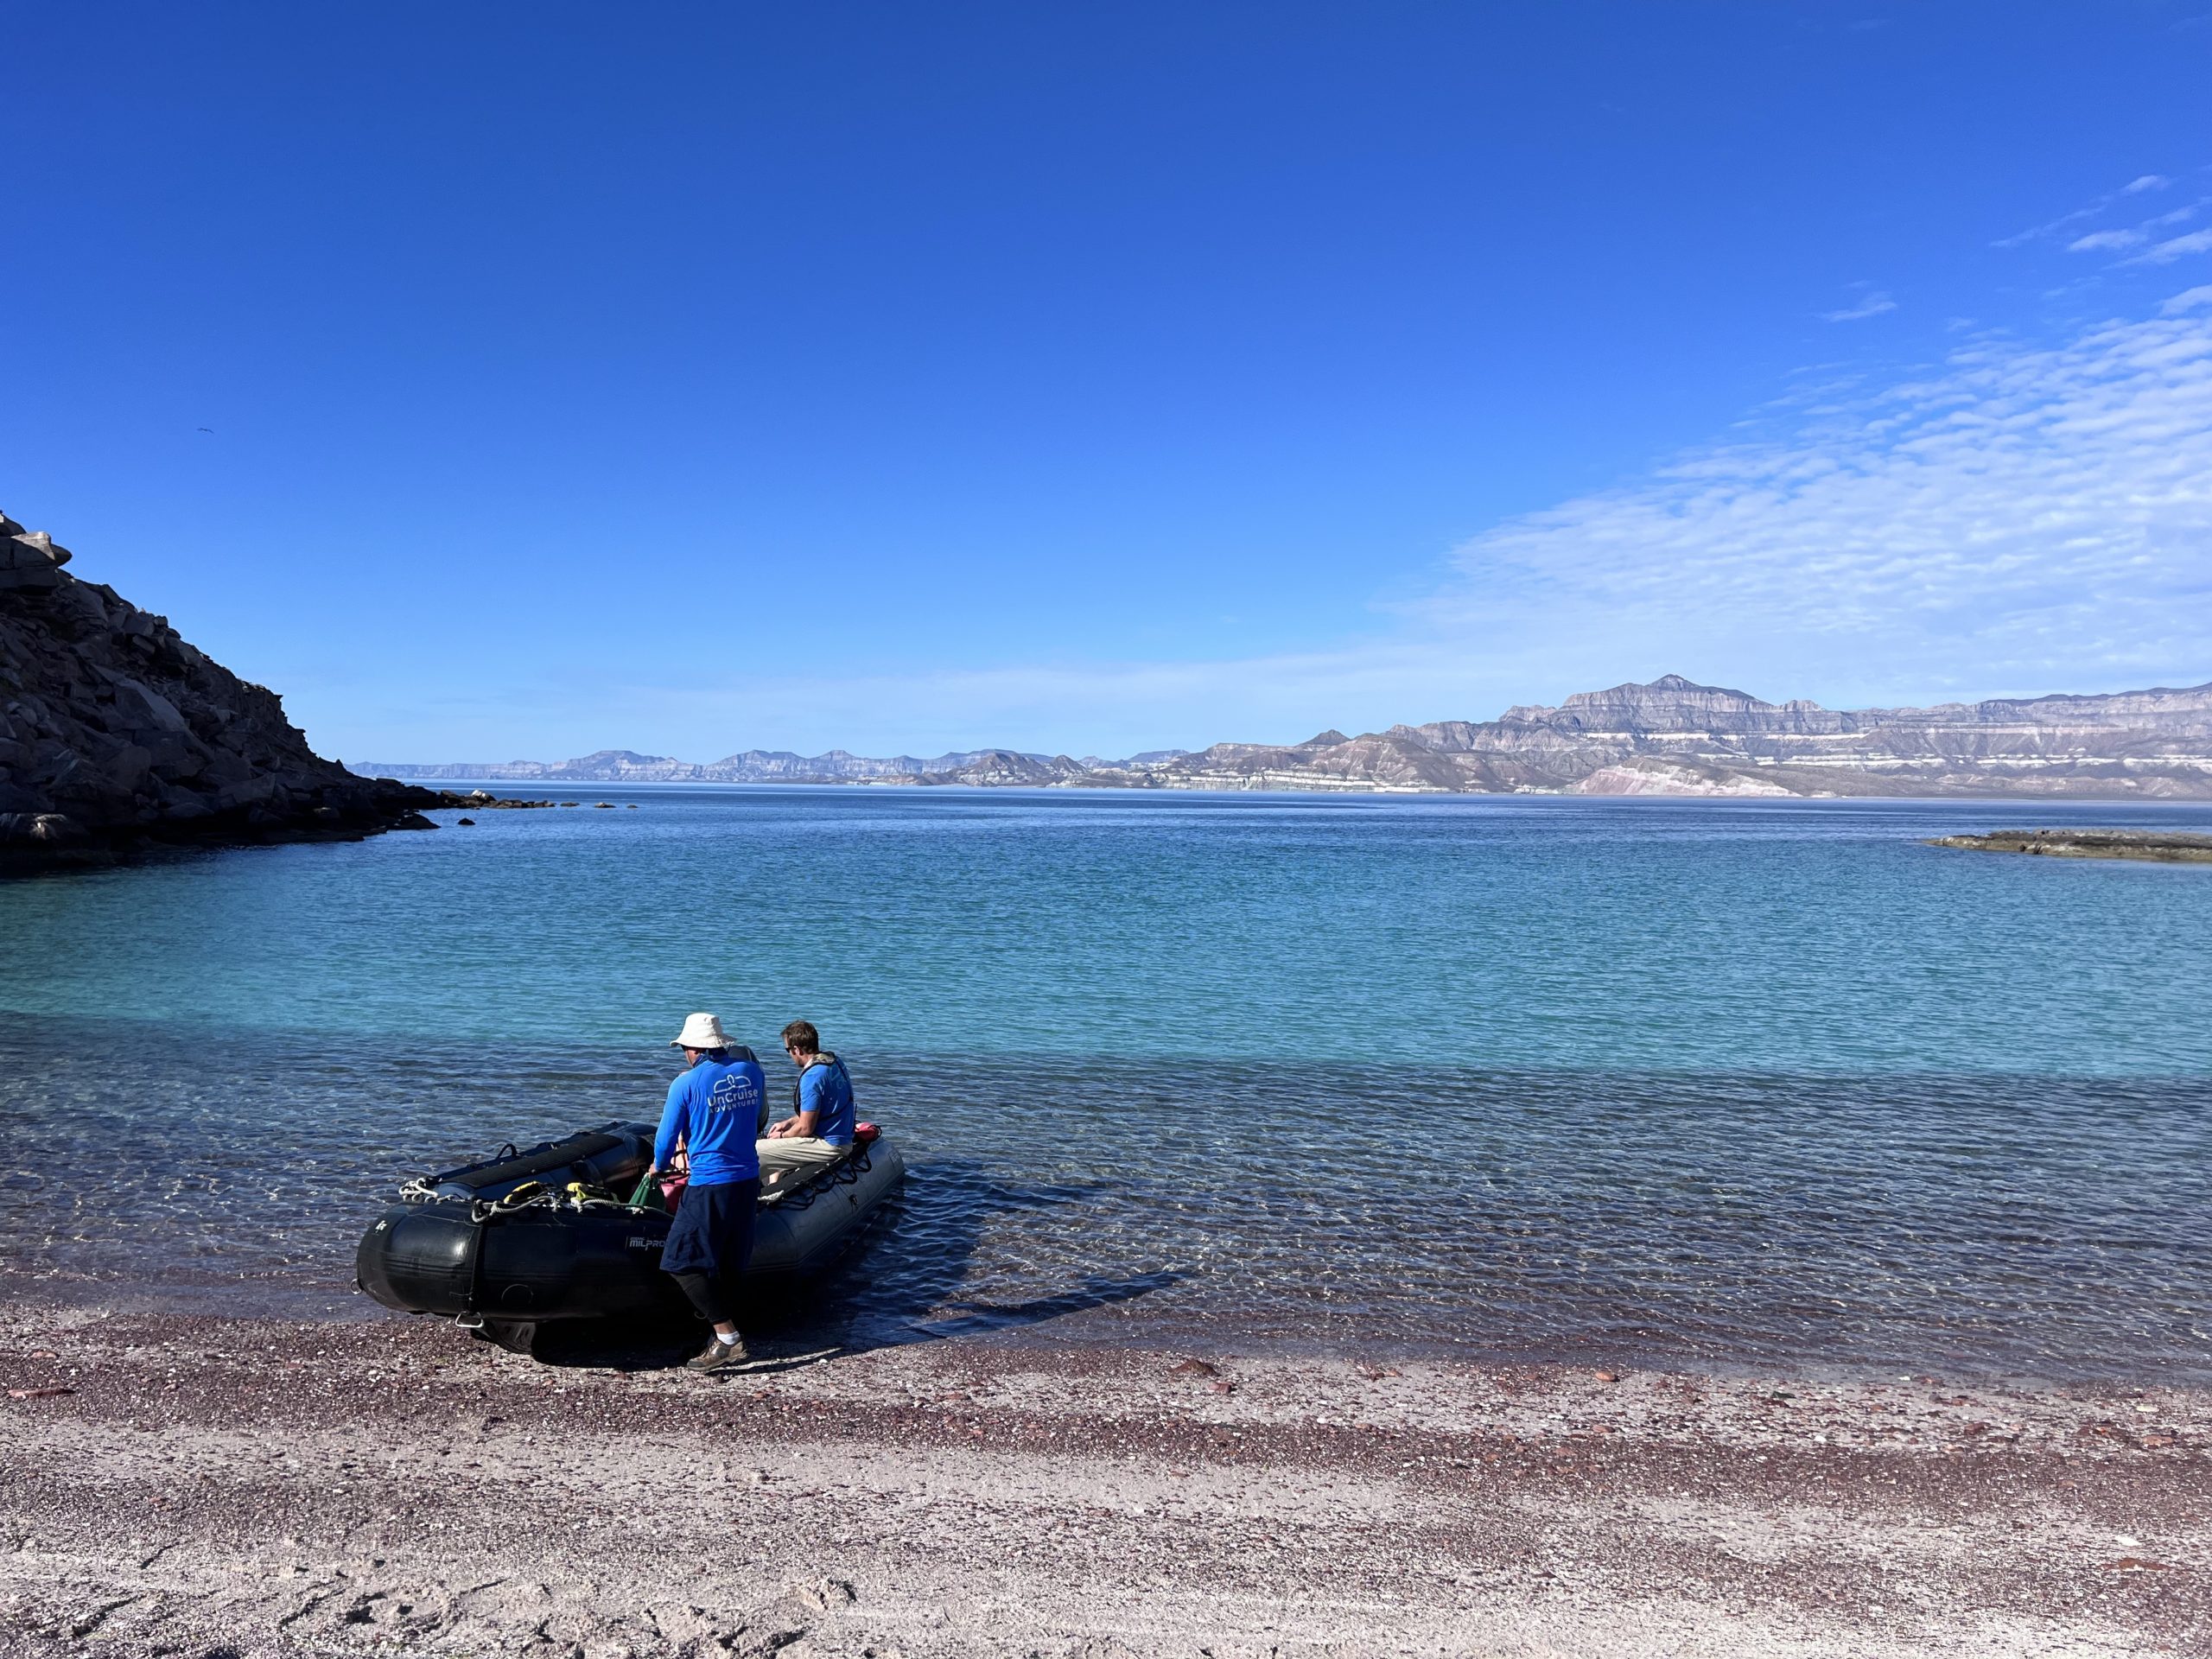 In Baja Mexico, we often set off in zodiacs from the beach